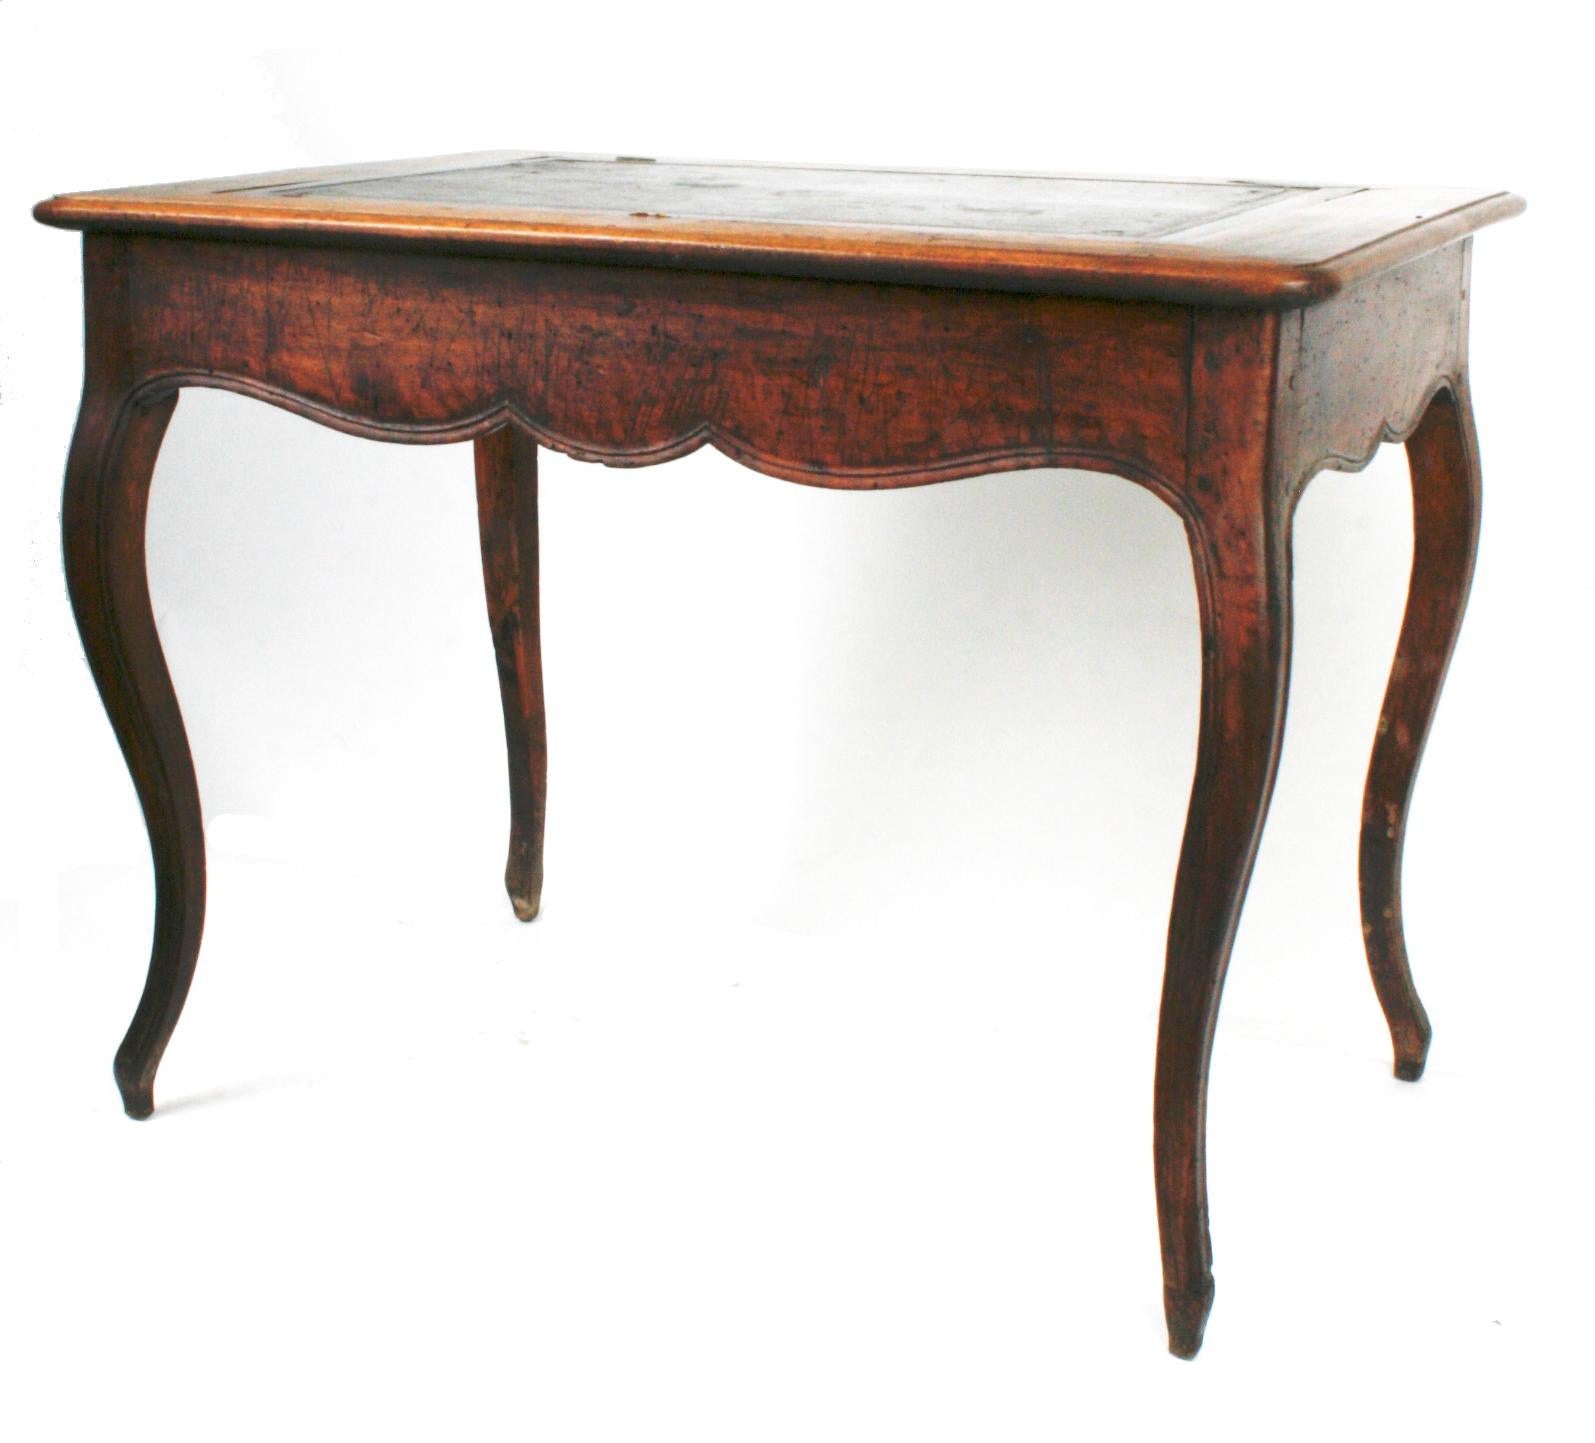 Louis XV c1770 walnut reading or writing table with adjustable leather tooled reading slope. The table has a scalloped apron with one drawer in the front and stands on cabriolet legs. The table has what appears to be an original finish and great